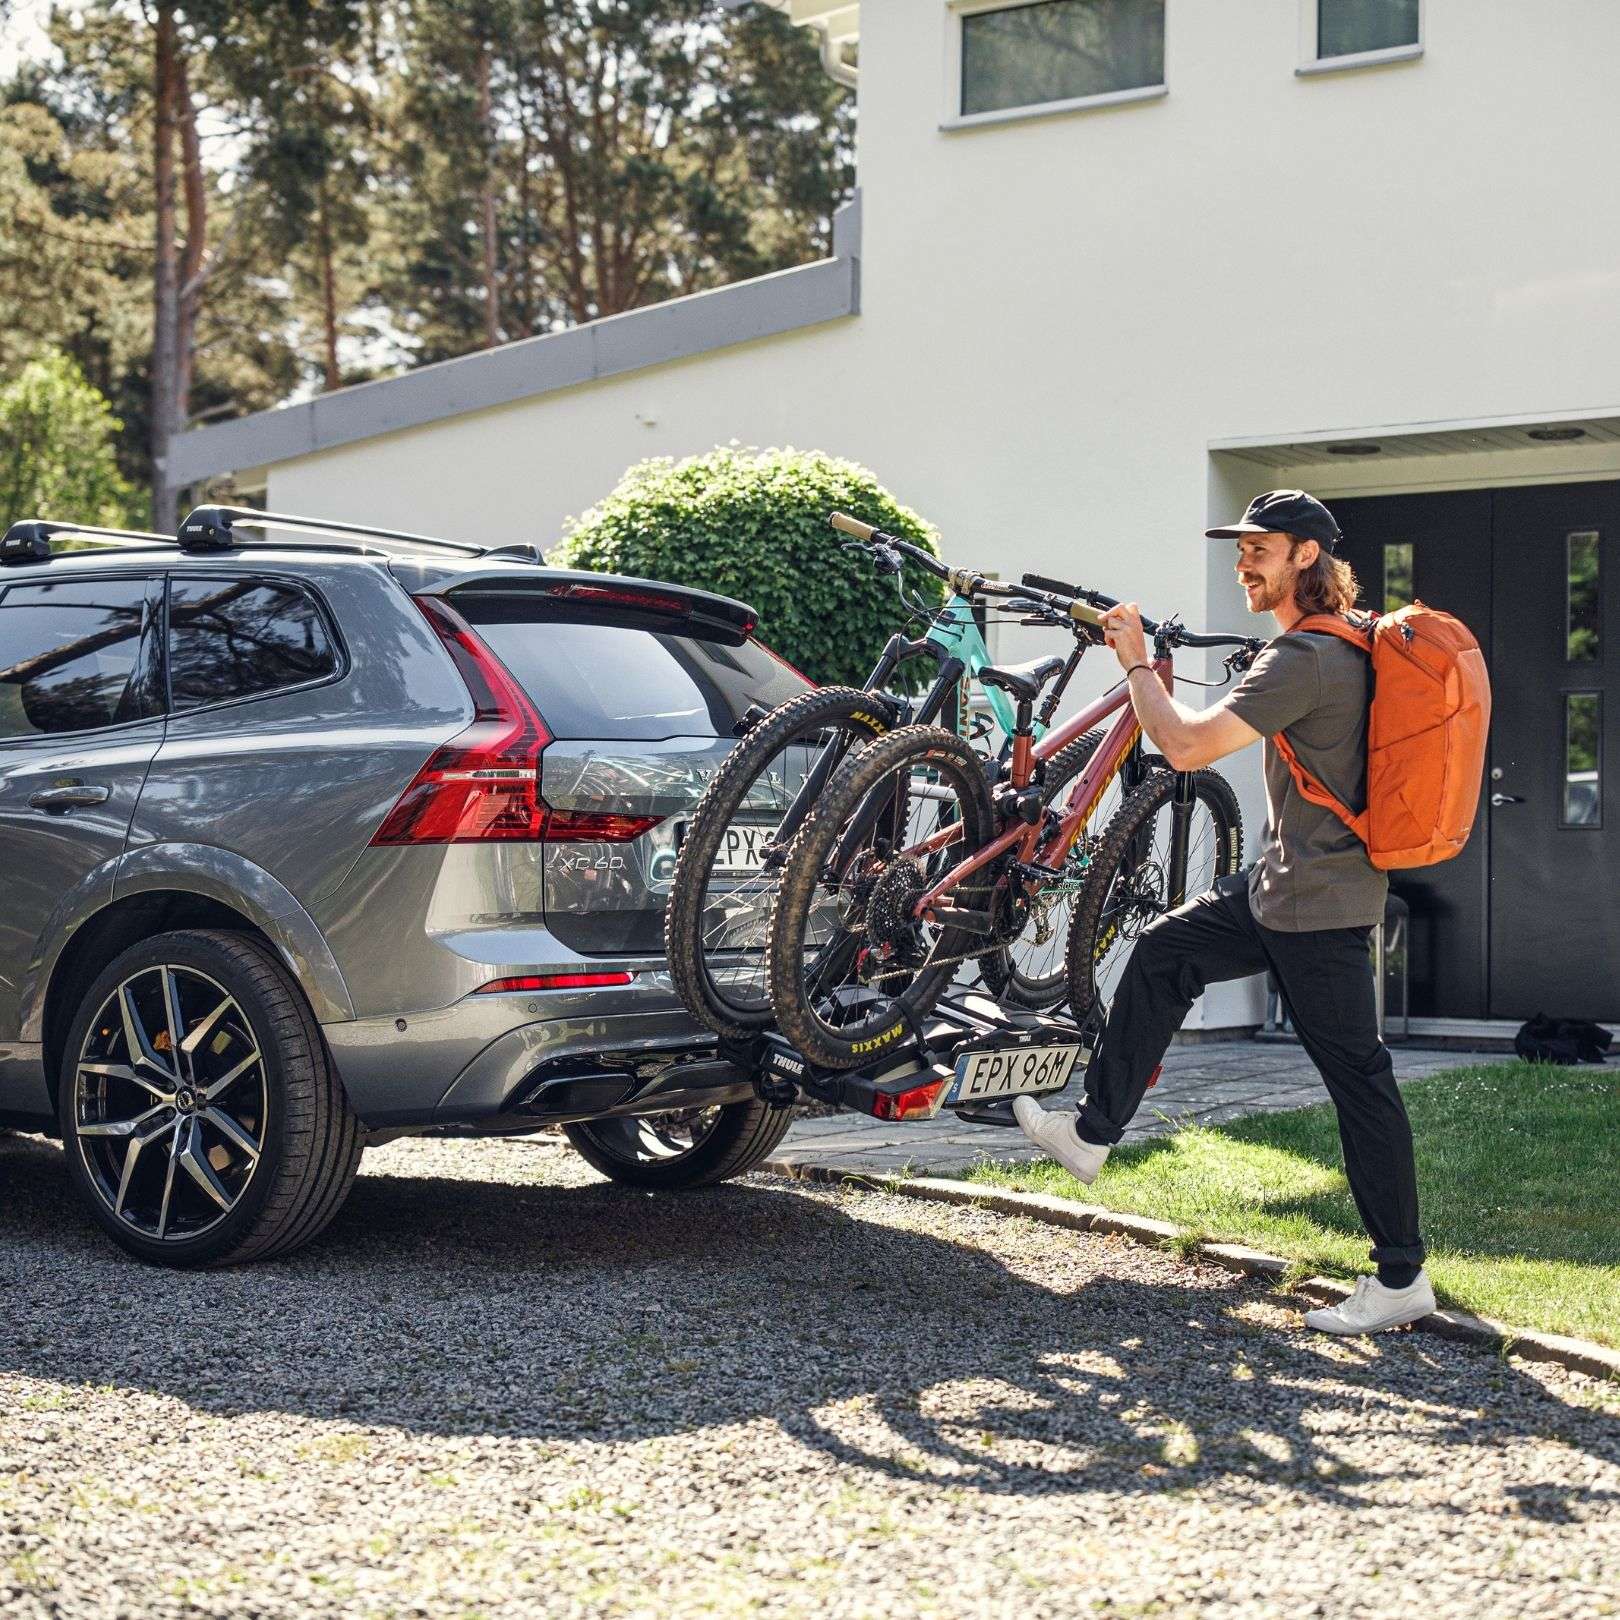 Image of person loading bikes on bike rack attached to car